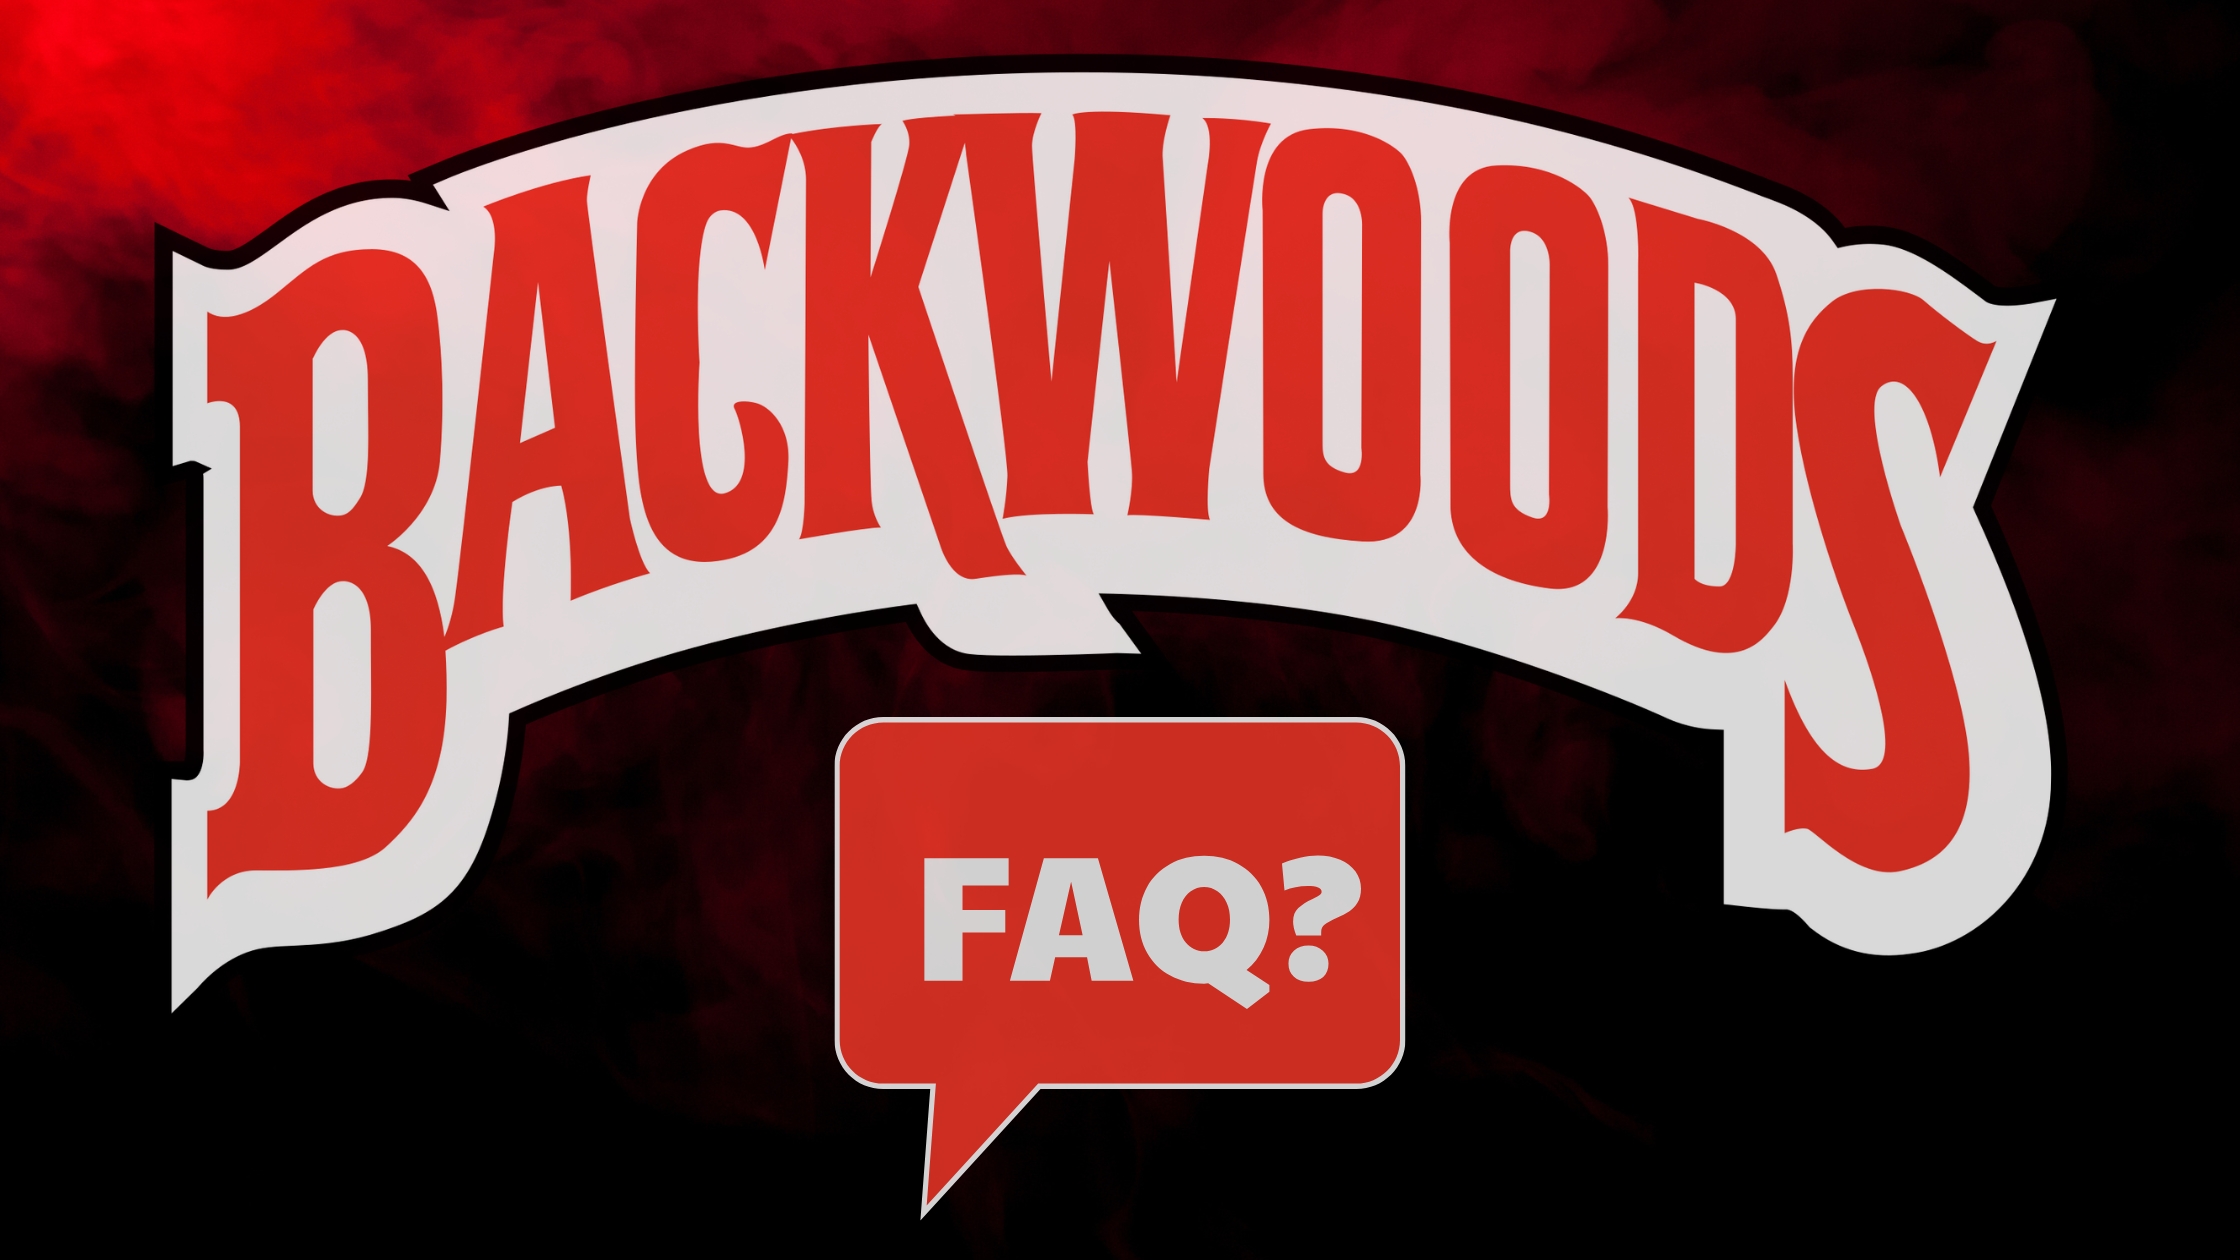 All FAQs About Backwoods Cigars Now Answered